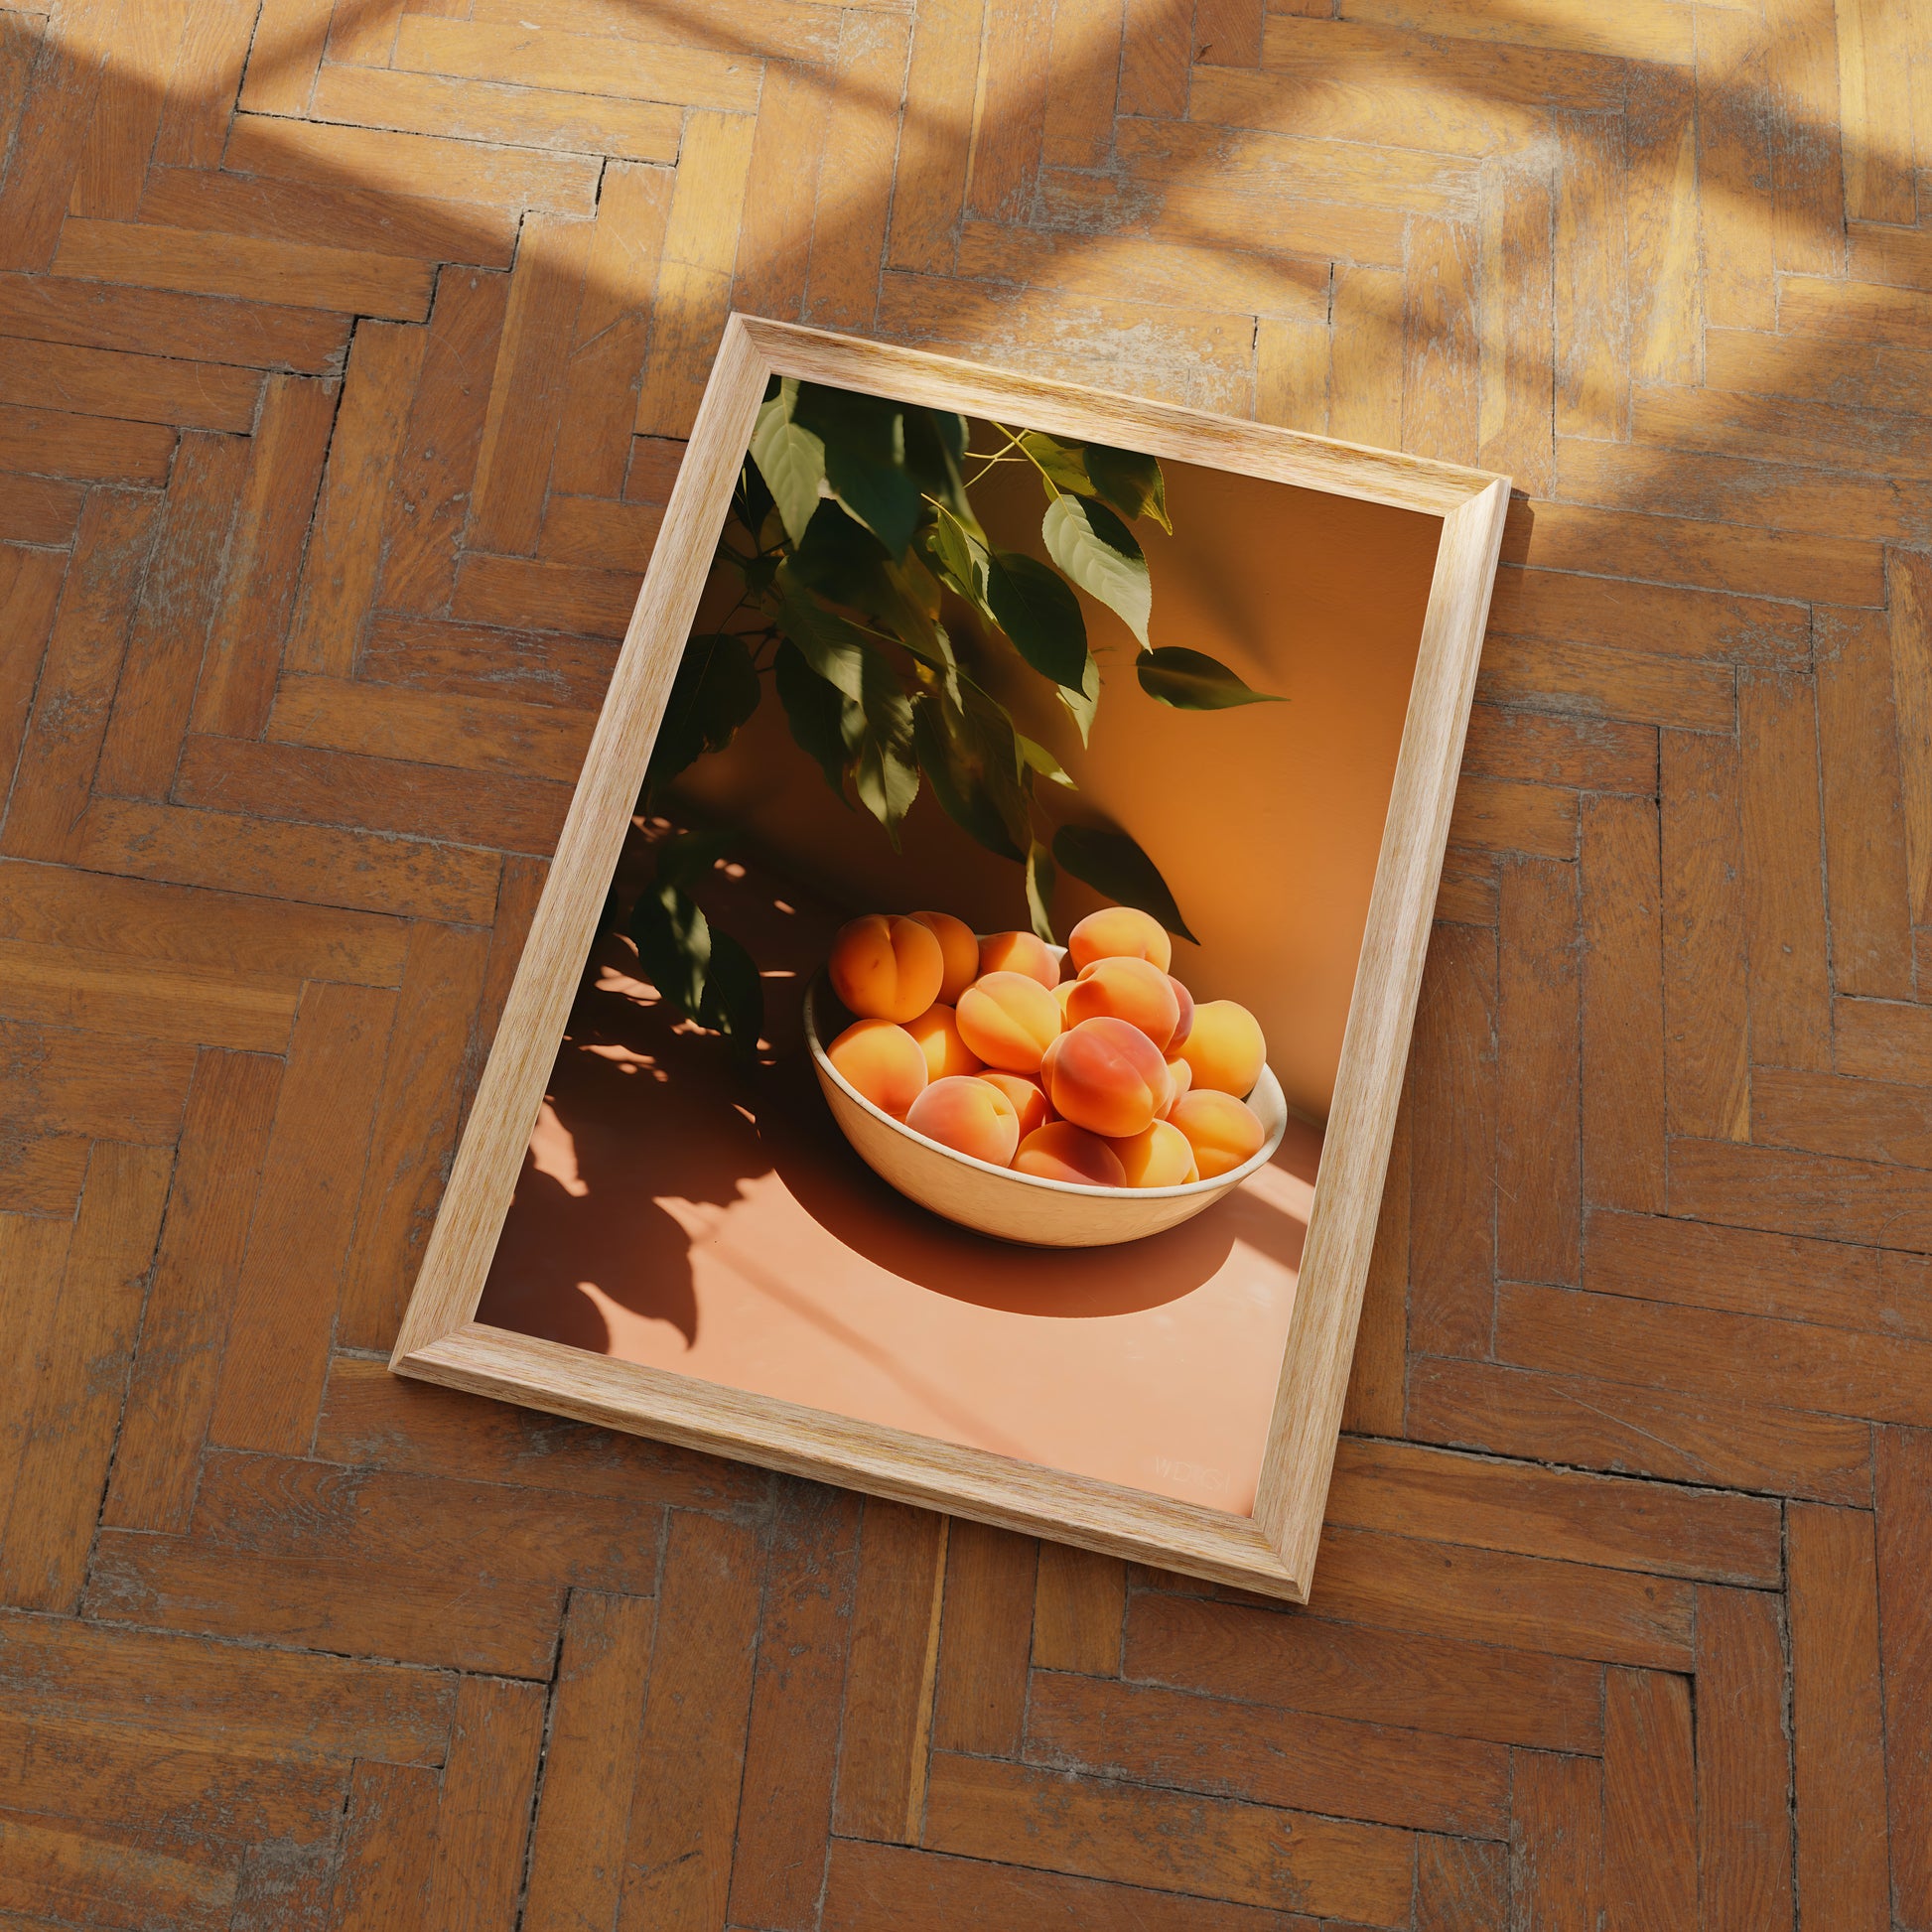 A framed picture of a bowl of apricots on a floor with herringbone pattern wood.